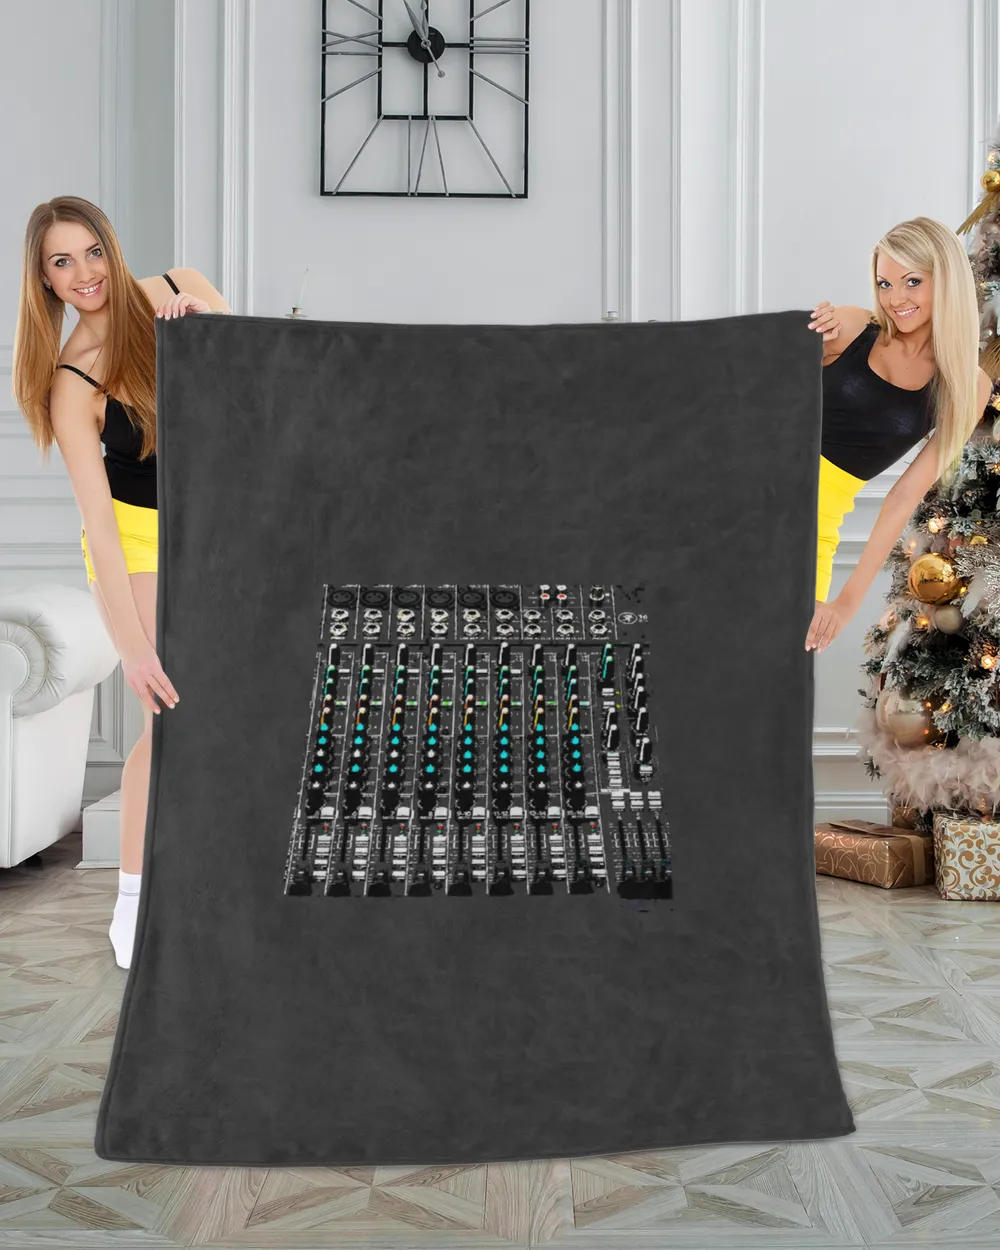 Sound Audio Engineer Mixing Board T-Shirt